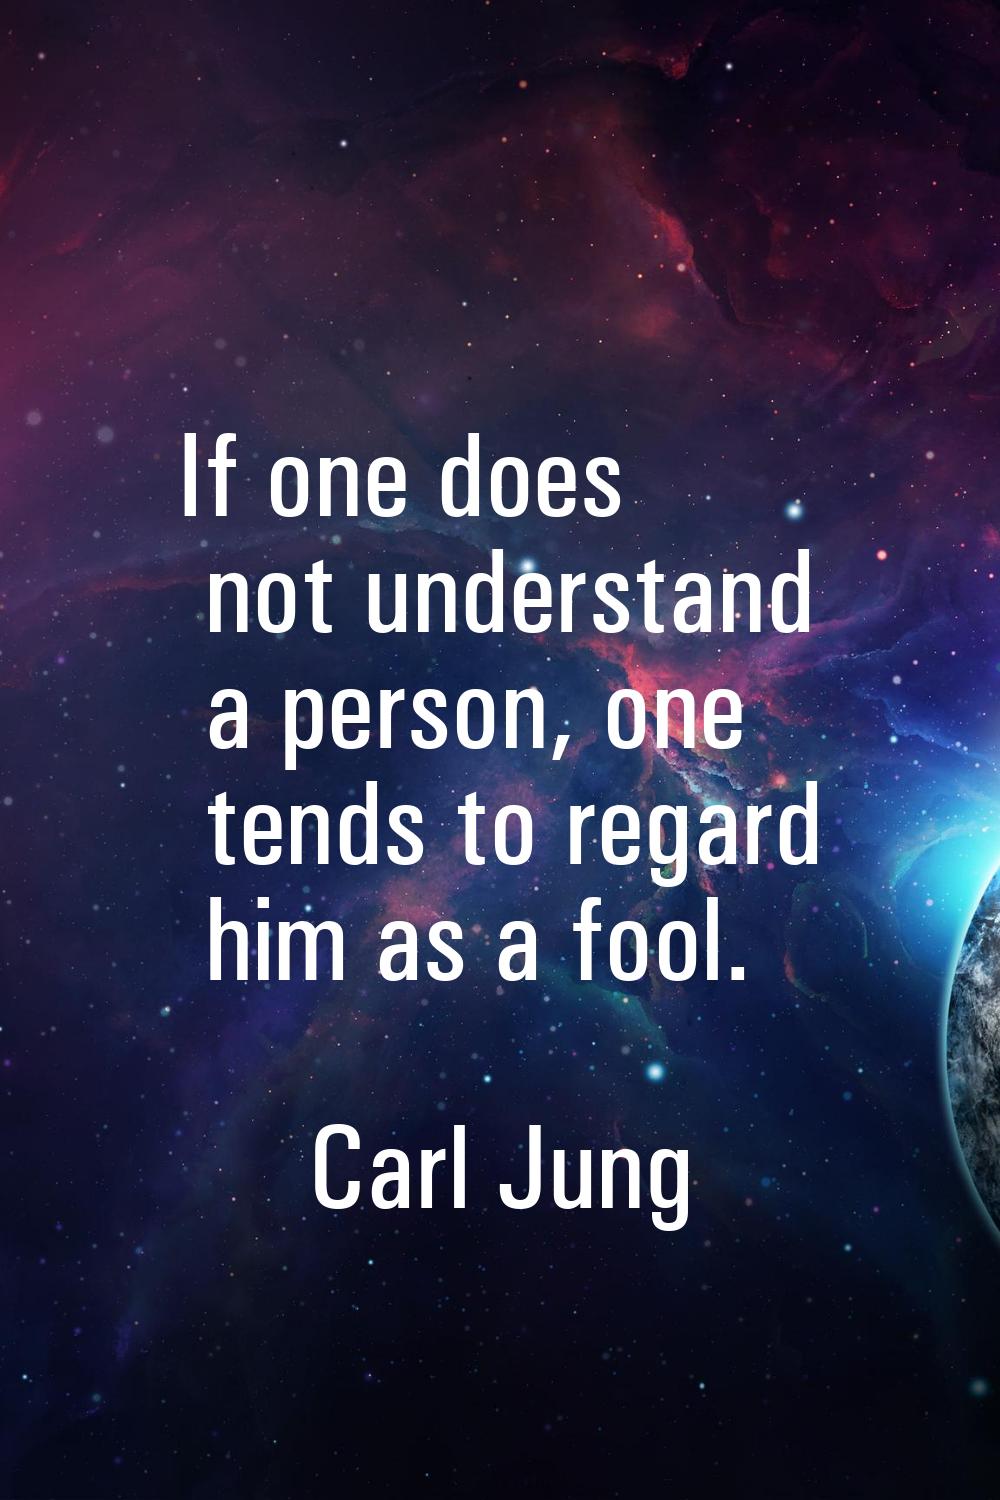 If one does not understand a person, one tends to regard him as a fool.